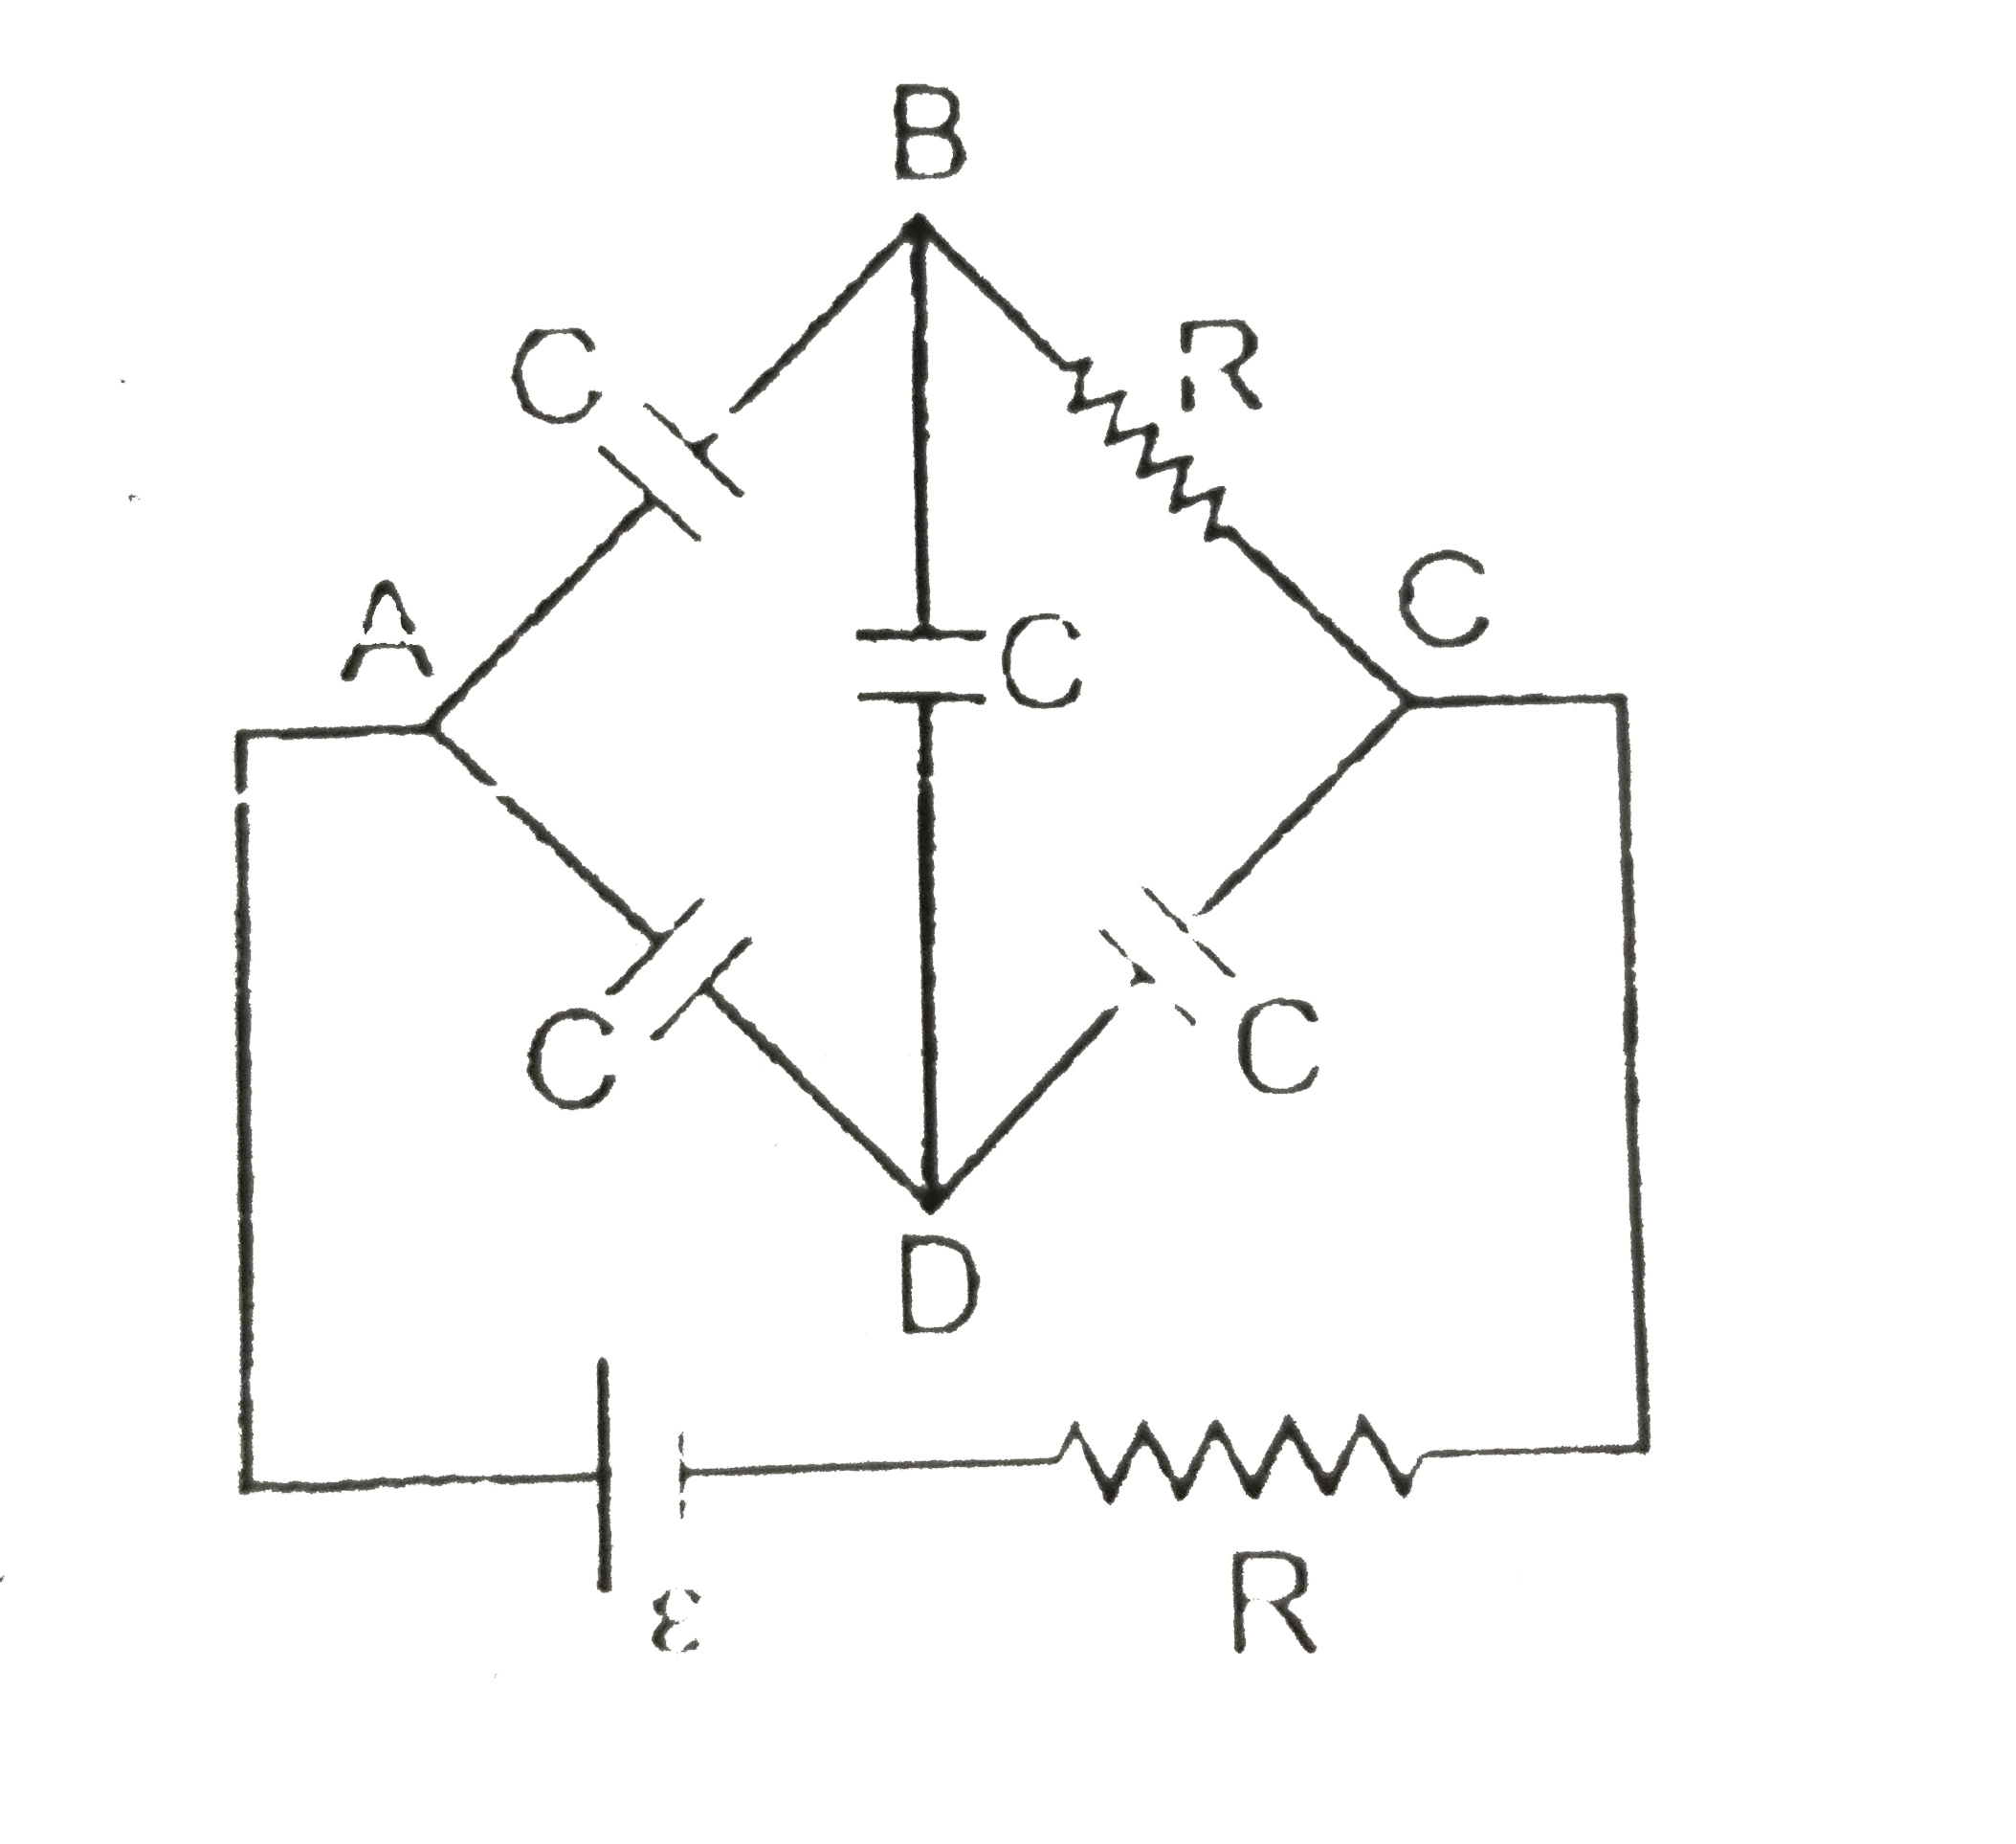 In the circuit shown, charge on the capacitor connected between B and D at steady state is (initially all the capacitors are uncharged)